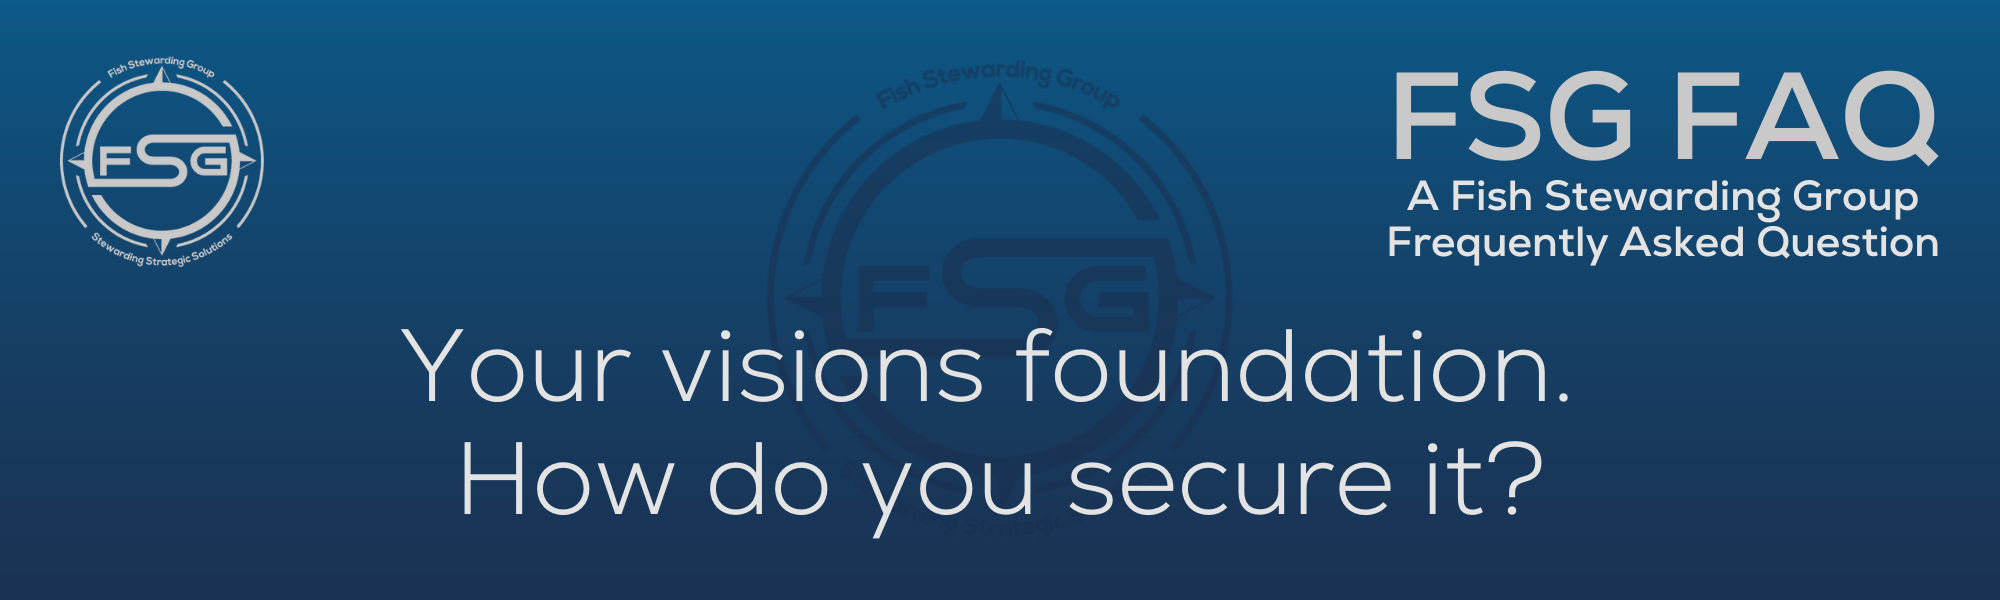 A rectangular and long thing Footer FAQ Image on the bottom of the Your visions foundation? Page on the website. The background is a blue gradient color that goes from a dark blue on the bottom to a lighter blue on top. The text in lower center of the image in a light gray text that reads: Your visions foundation? The text in gray in the upper right corner reads: FSG FAQ. Right beneath that is more gray text in a smaller font that reads: A Fish Stewarding Group Frequently Asked Question. On the upper left side is the FSG Logo in gray. The logo has the letters FSG in the middle with a circle with four pointed arrows facing north, south, east and west with the S connected to that circle. Four rounded lines make the next circle of the circle and the last layer is a thin circle with the text on the Bottom that reads Stewarding Strategist Solutions and on top, the text reads Fish Stewarding Group. And Lastly in the center background of the image is a watermarked FSG logo, faded in blue, in the background.